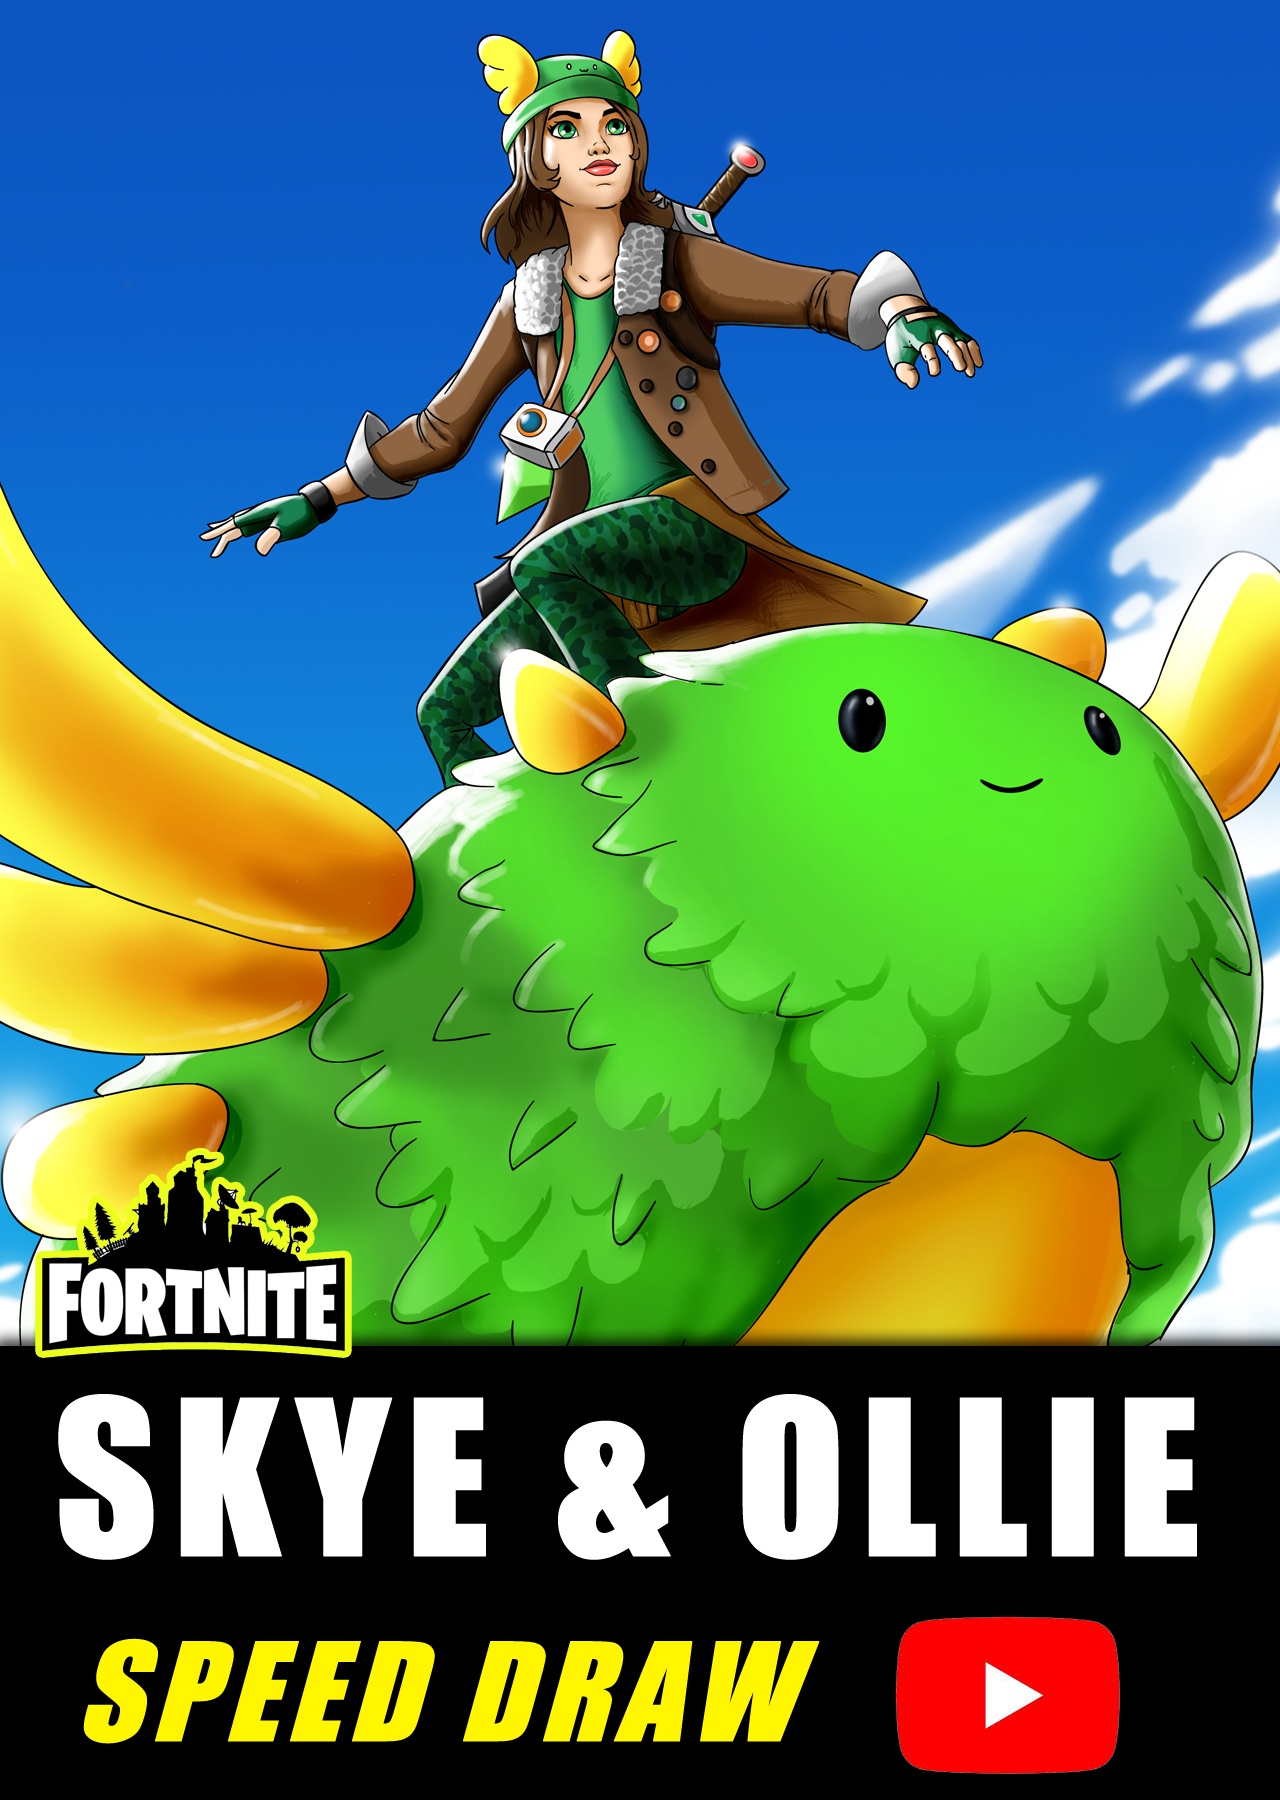 brittany ladd share how to draw skye fortnite photos